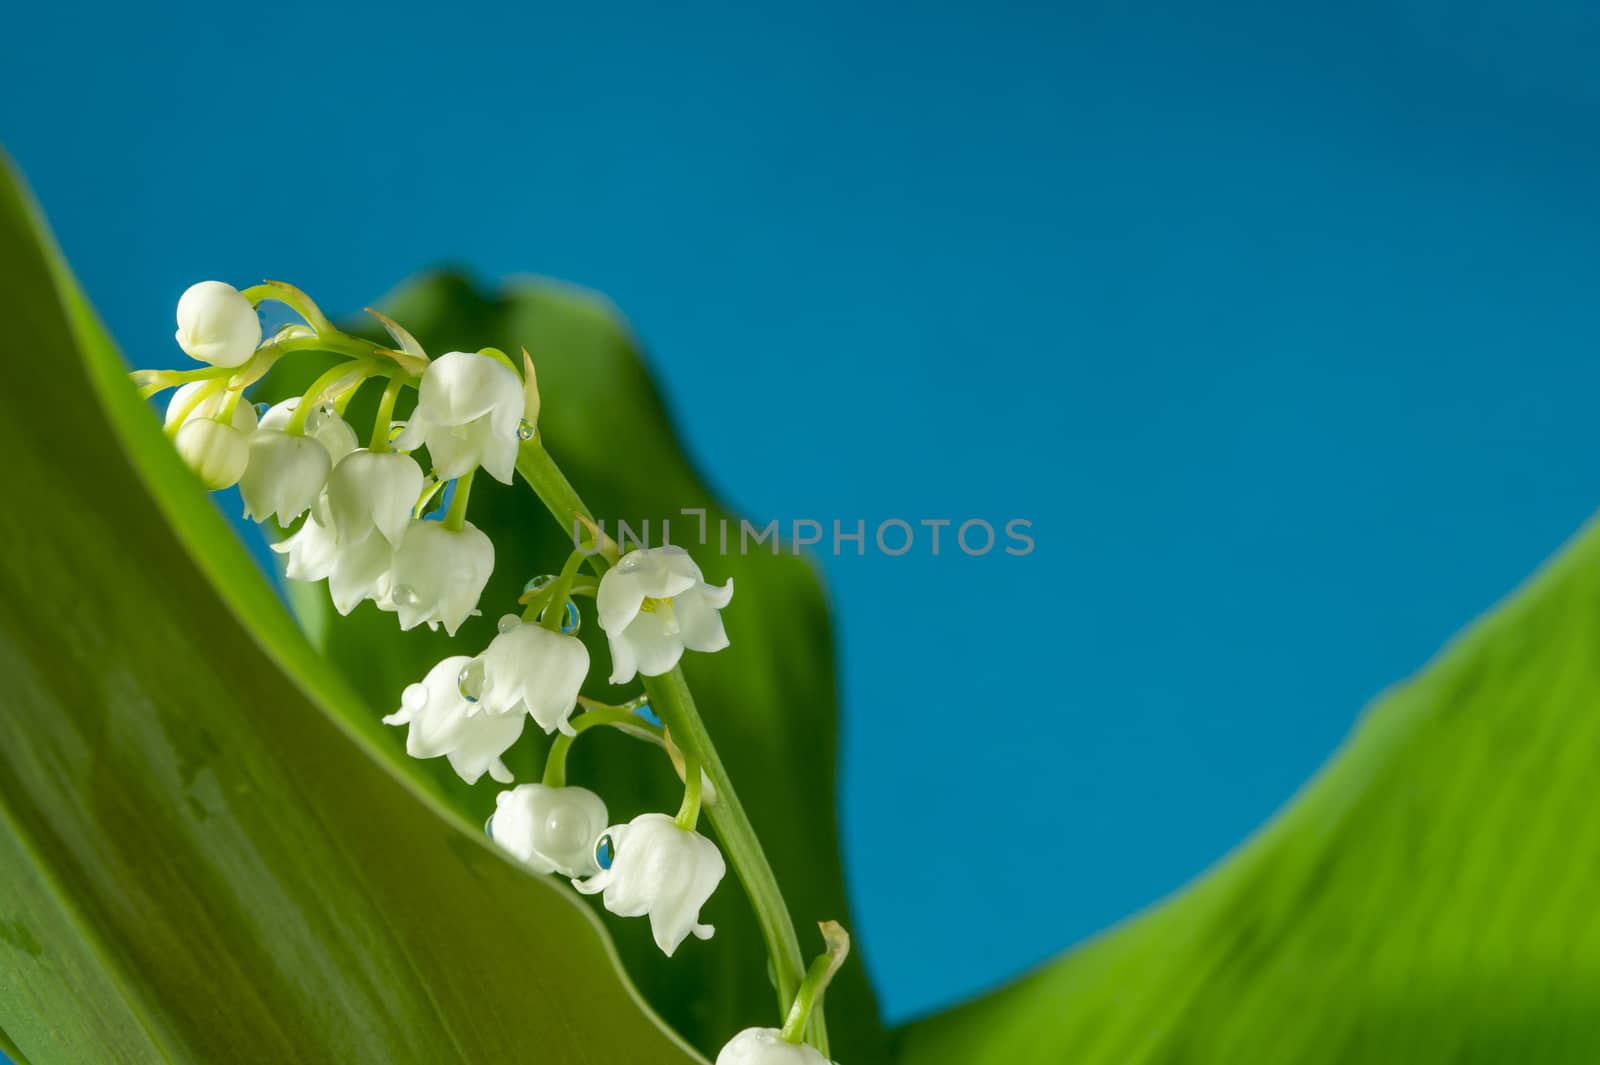 White Lily of the valley, Convallaria majalis is a highly poisonous woodland flowering plant in close up